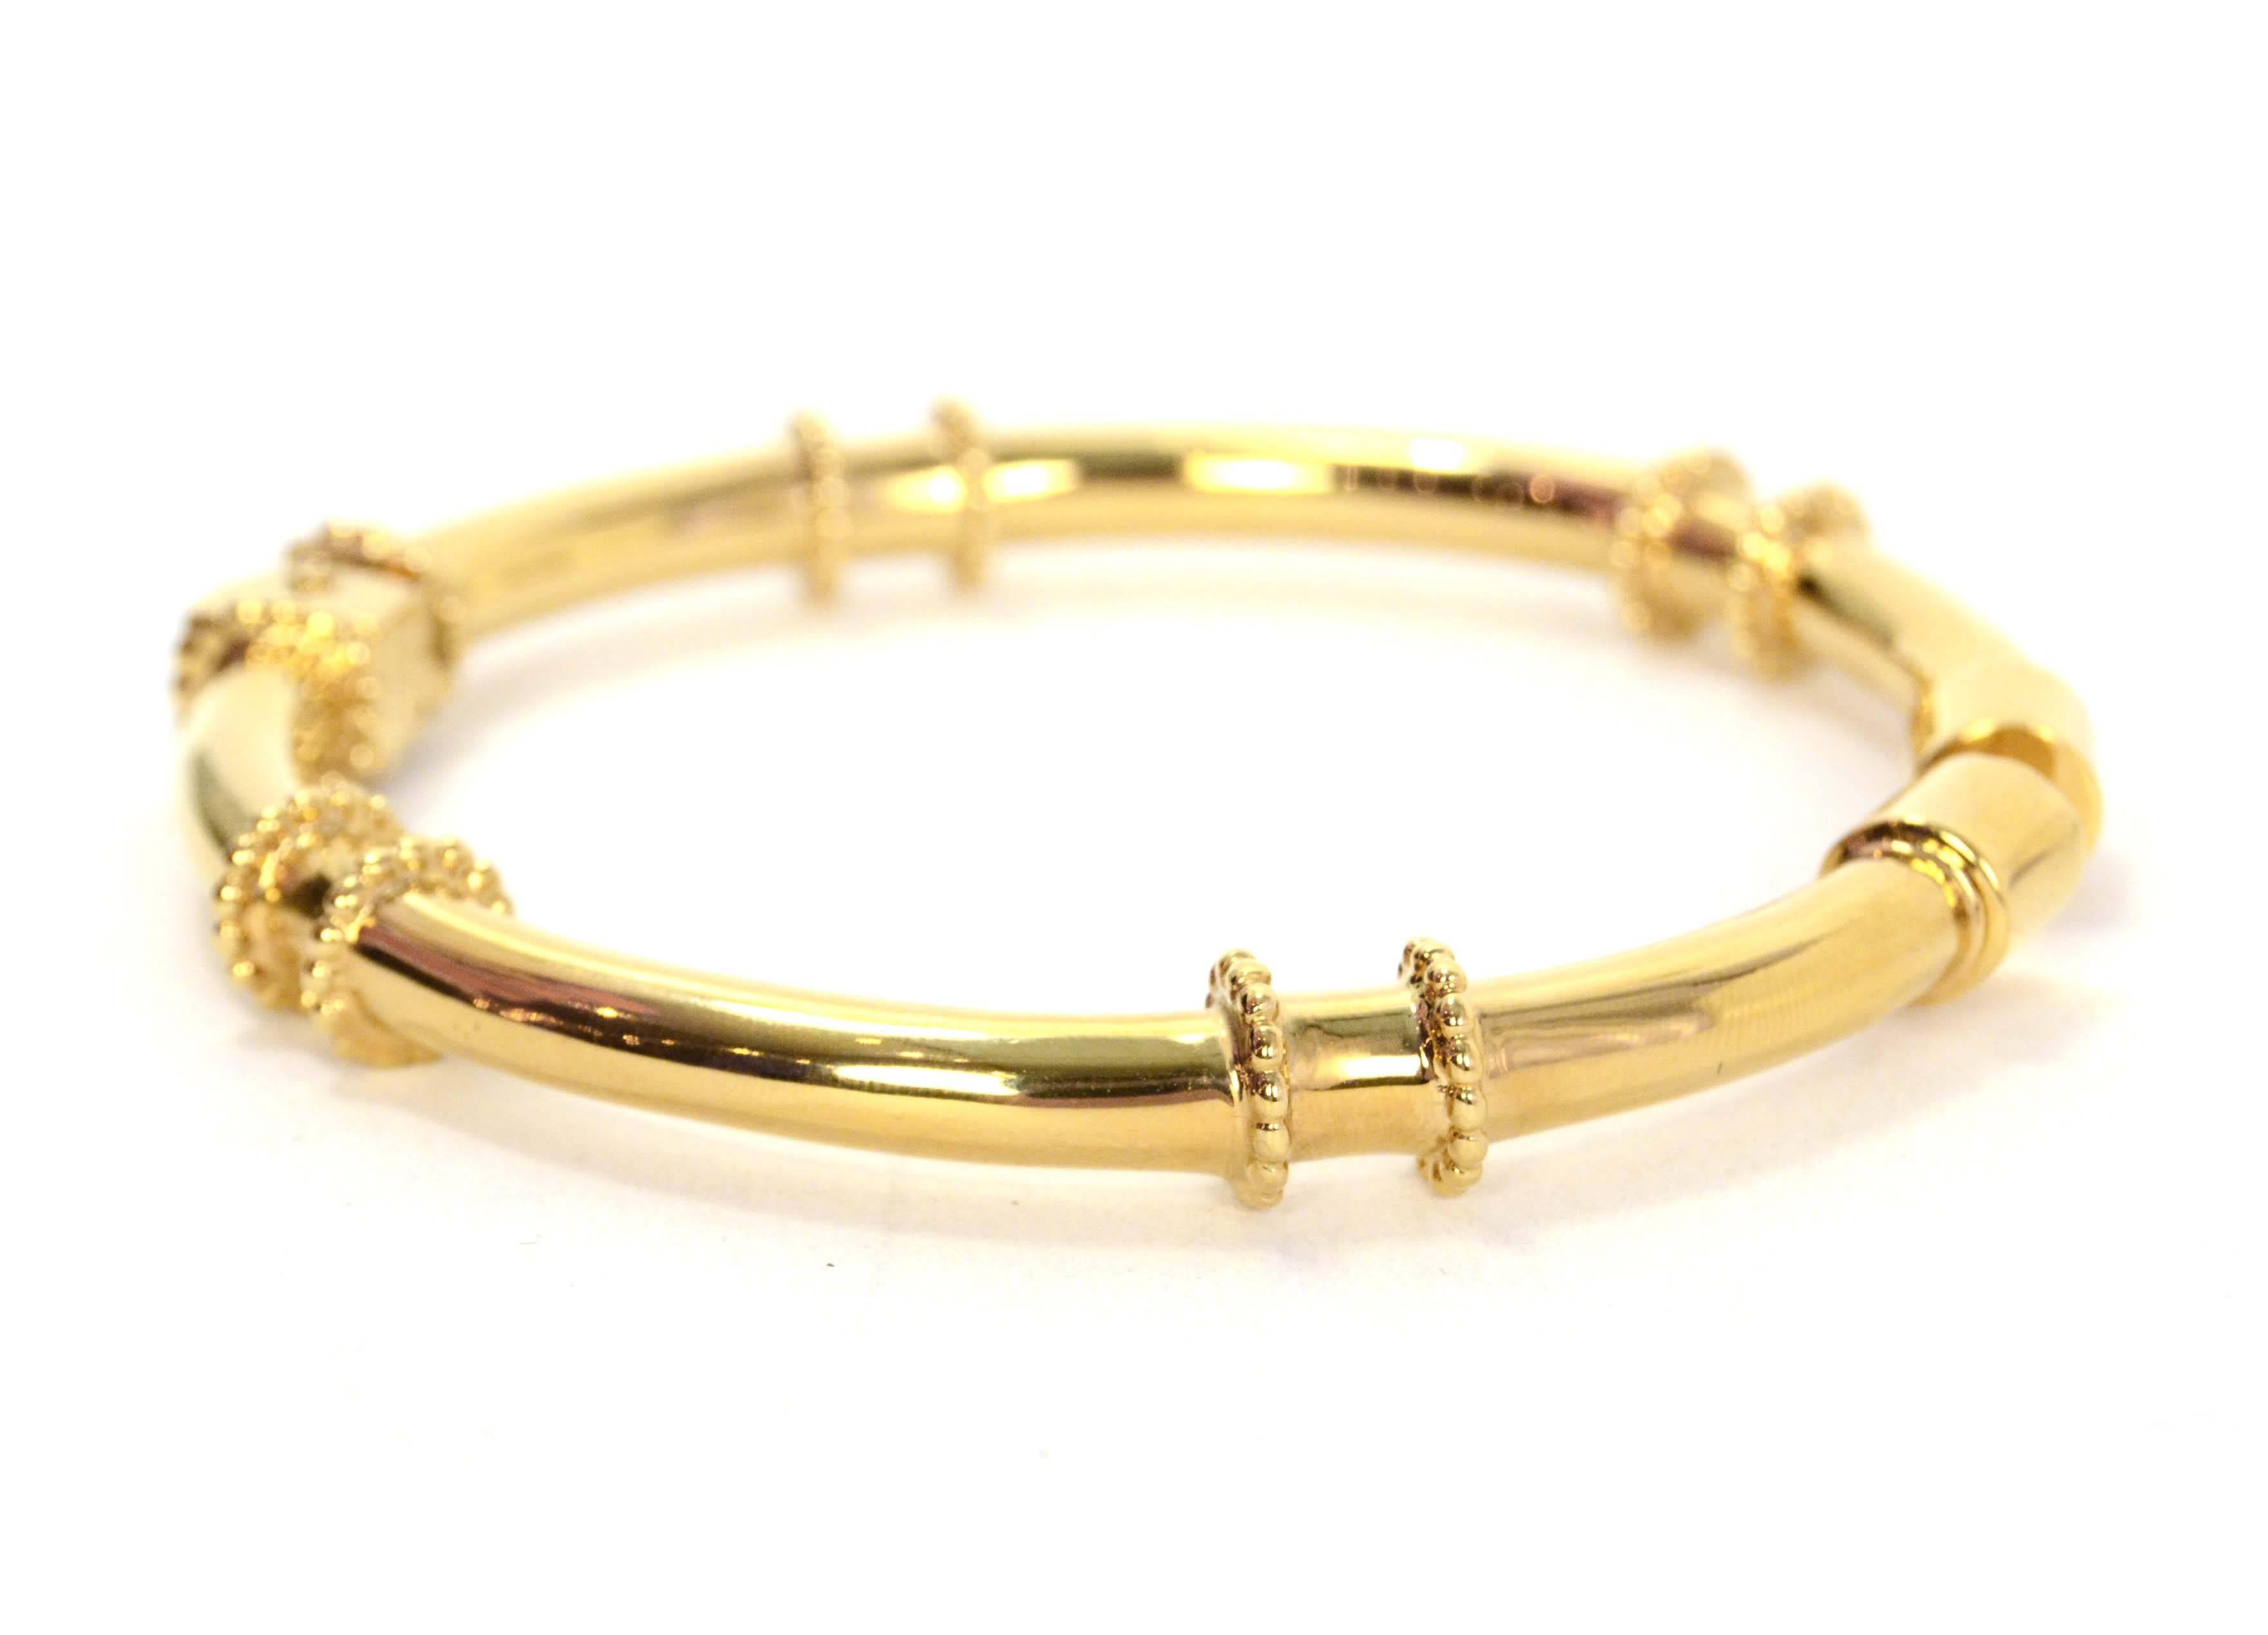 Chloe Gold Frankie Arm Cuff 
Features features little dotted cylinders throughout
Made In: Italy
Color: Goldtone
Materials: Metal
Closure: Hinge
Stamp: Chloe Made in Italy M/L
Retail Price: $441 + tax
Overall Condition: Excellent pre-owned